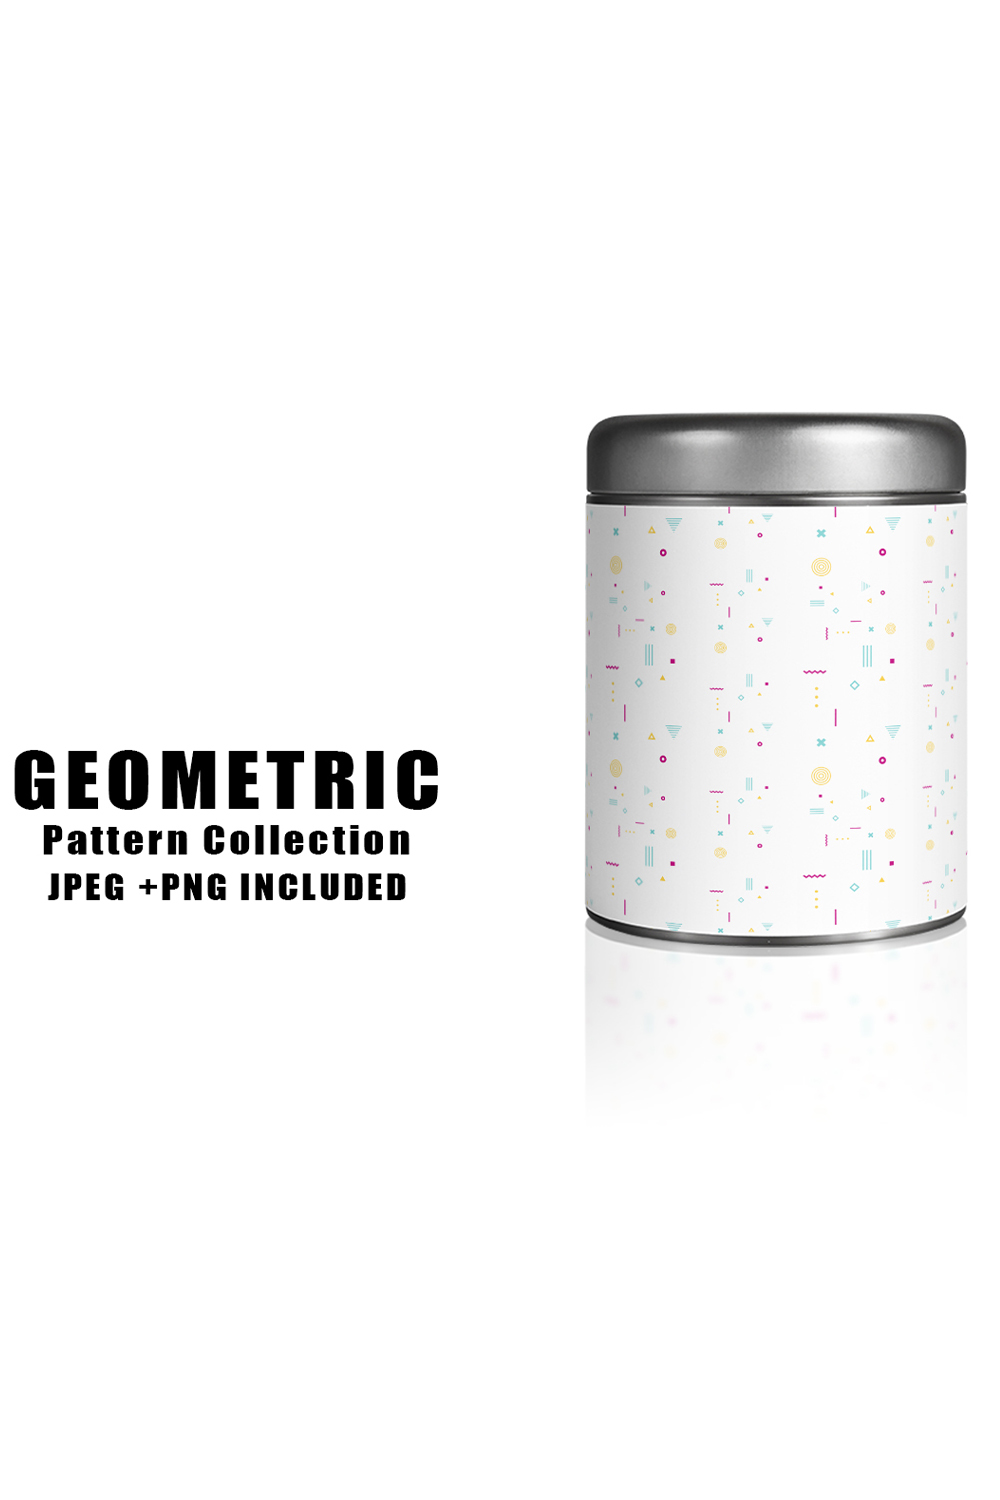 Image of jar with colorful geometric patterns